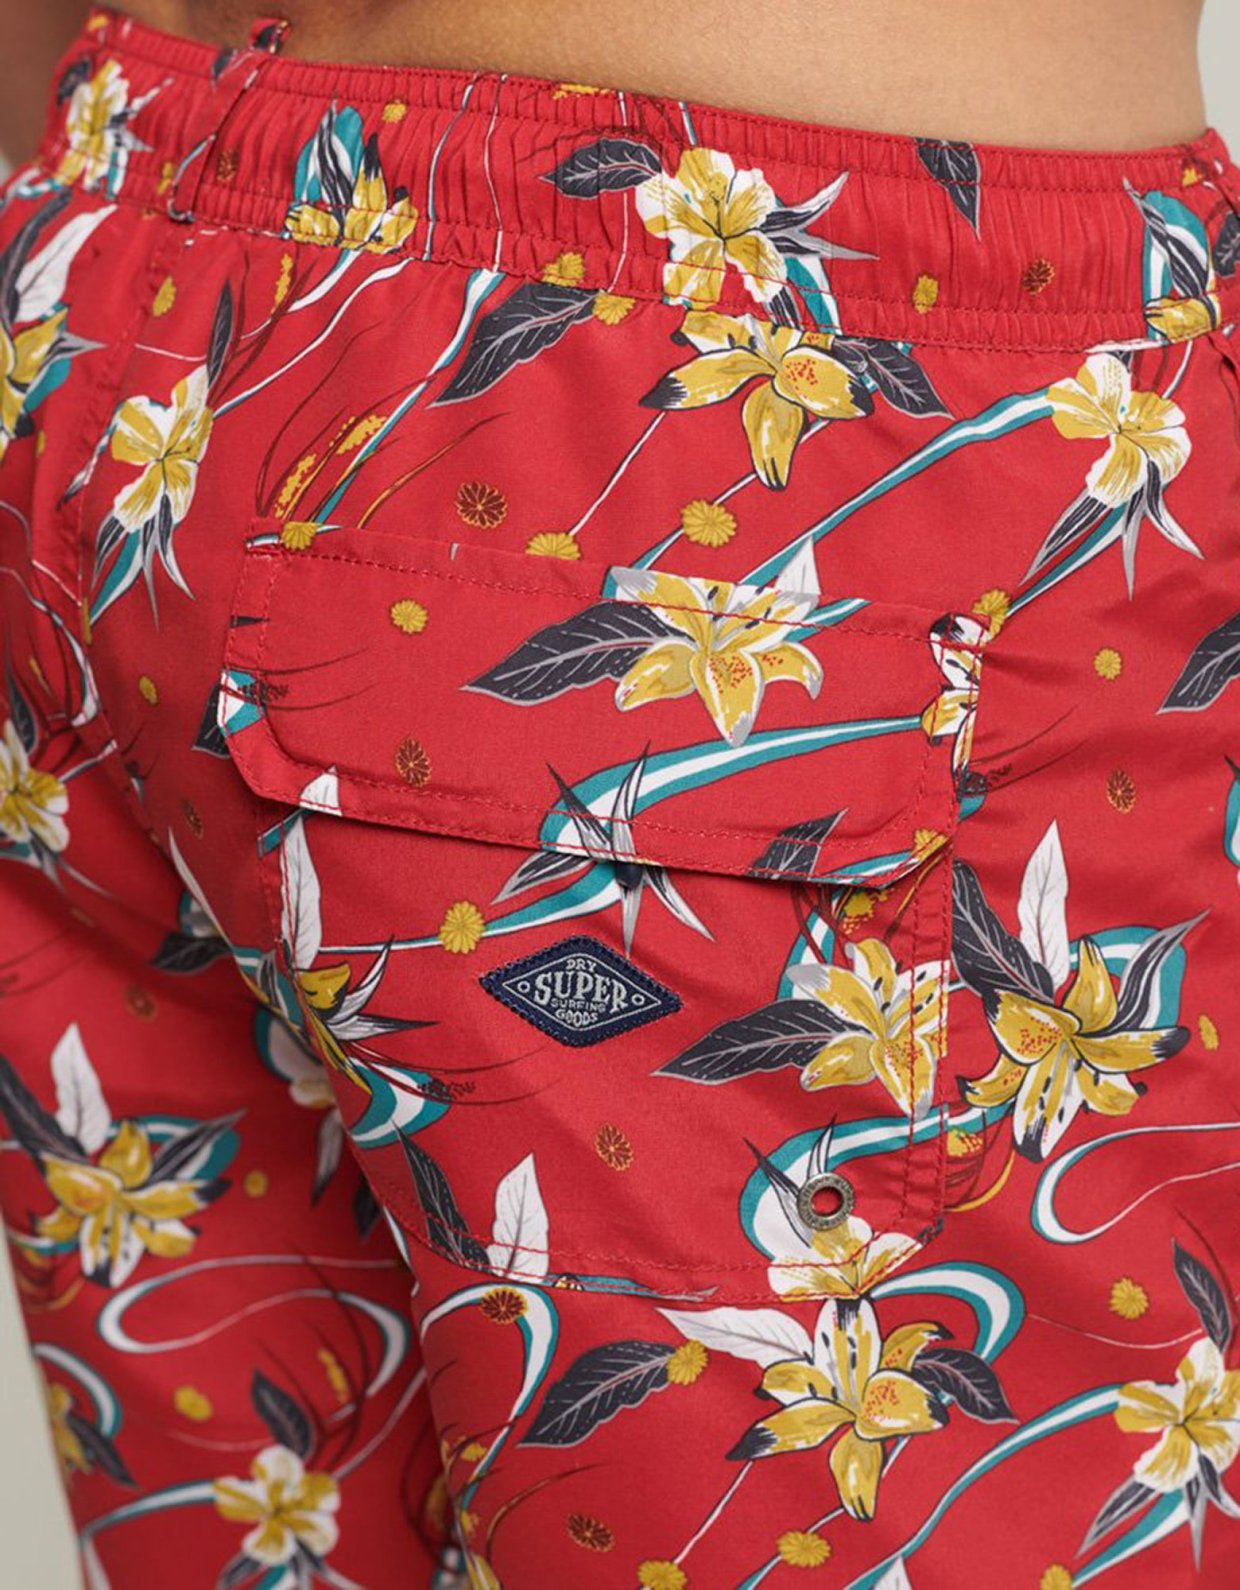 Superdry Ovin vintage hawaiian swim shorts red lily aop